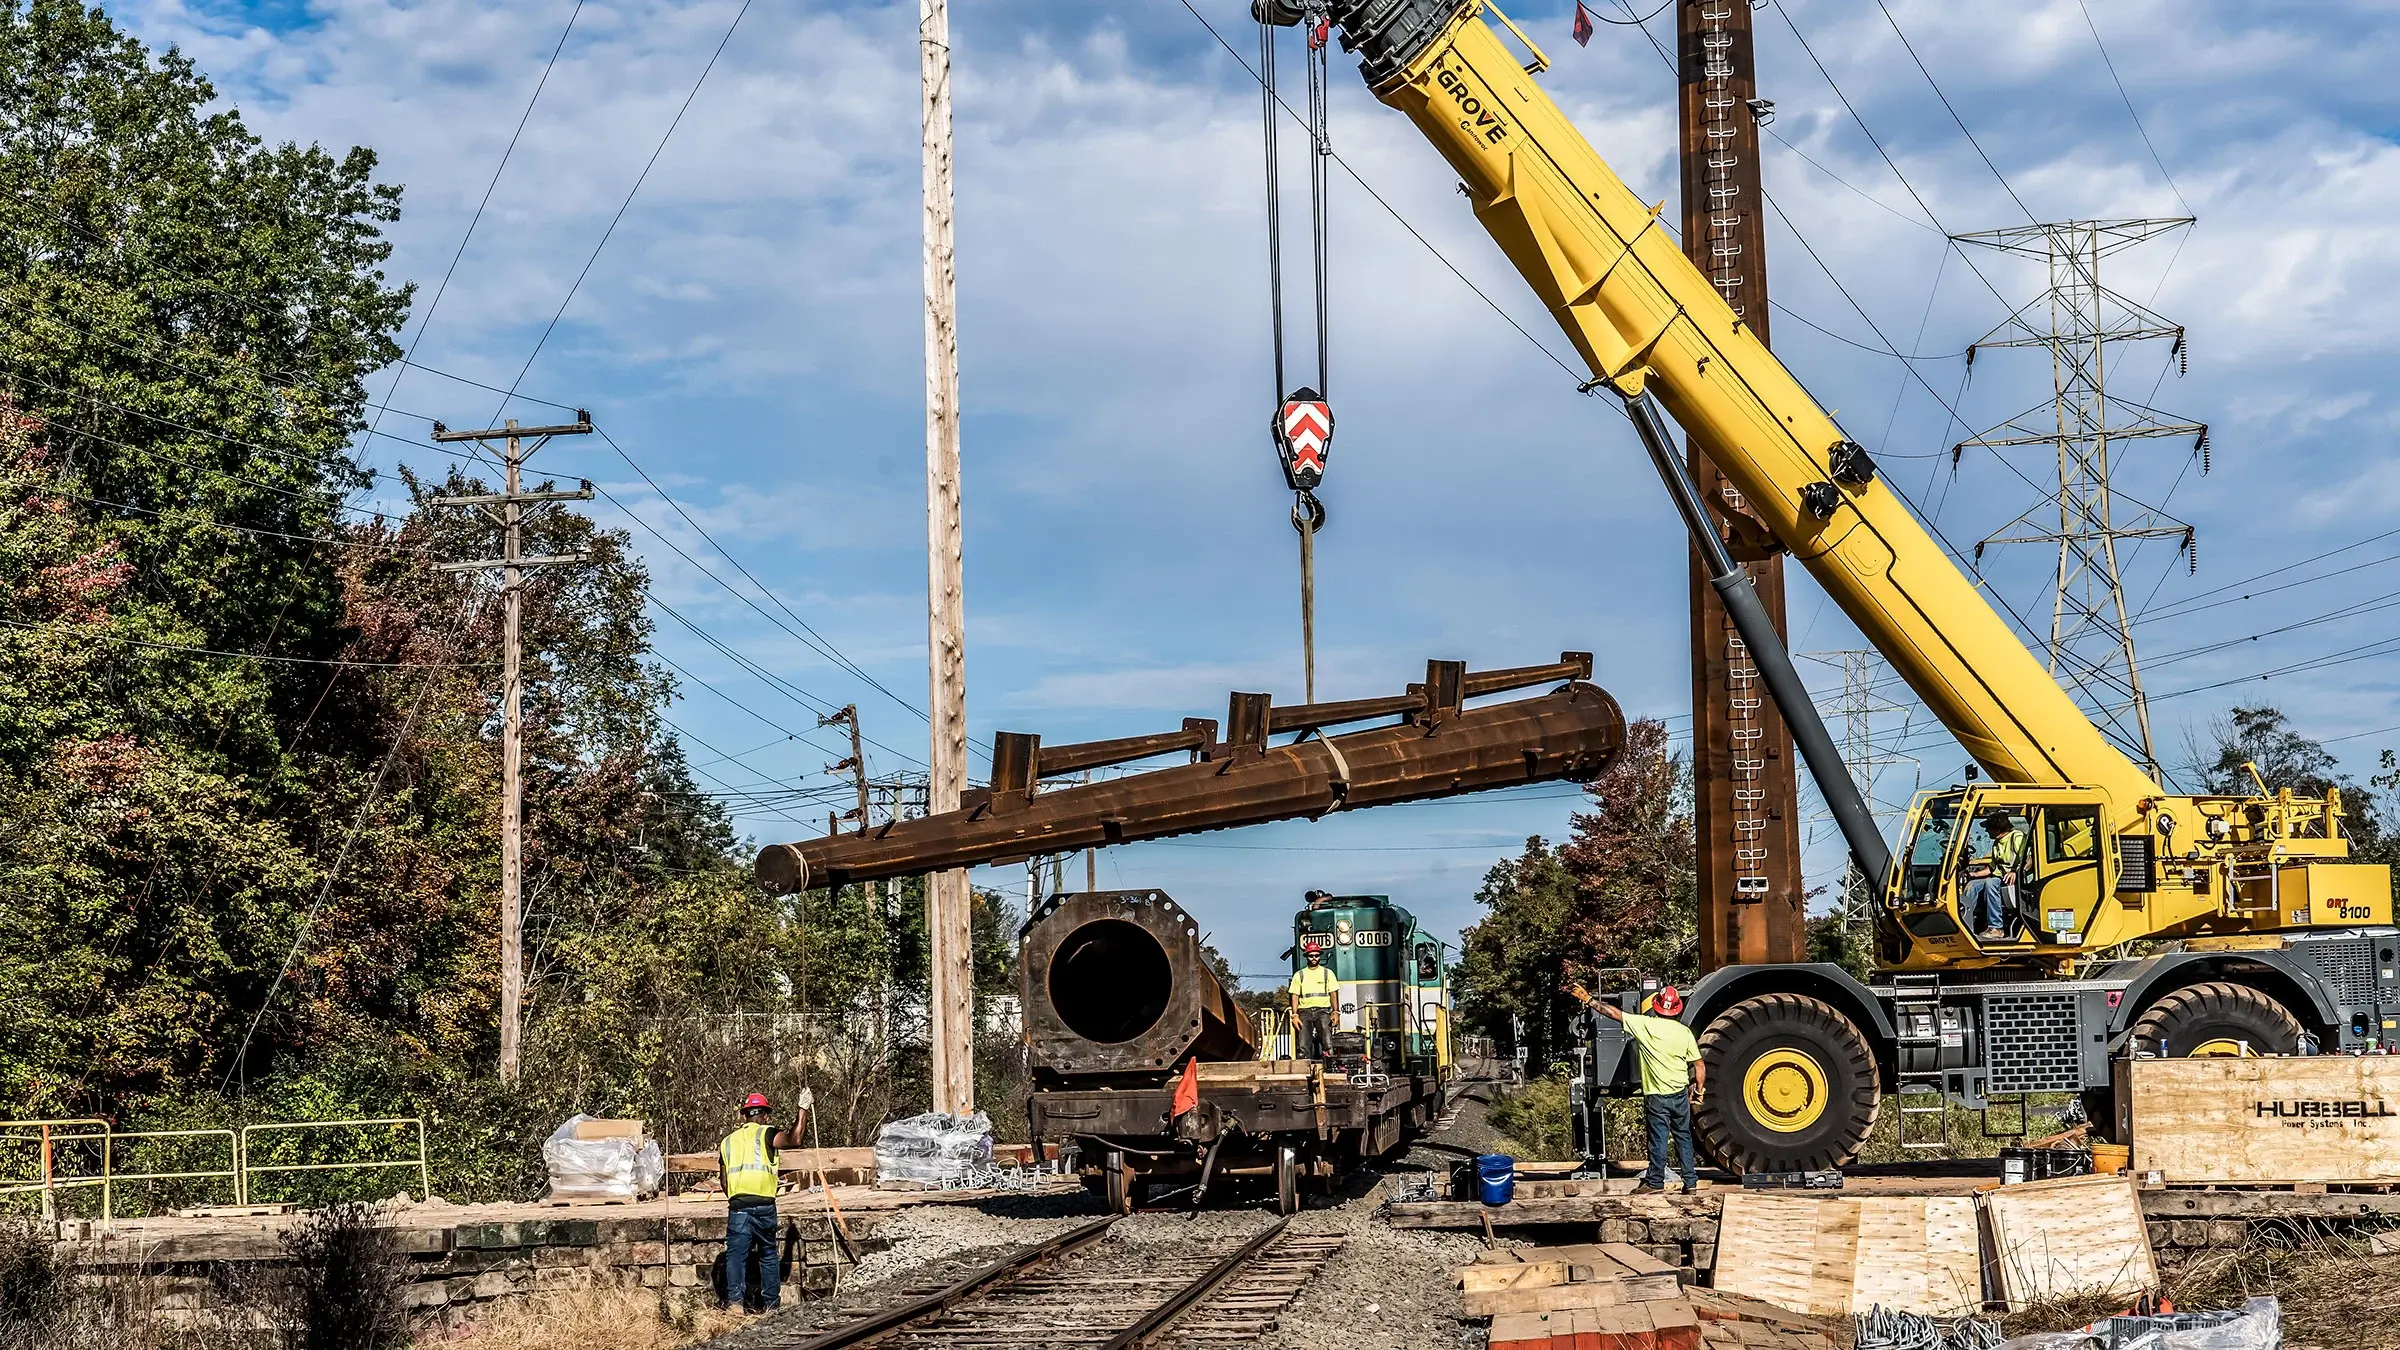 A mobile crane lifts a piece of a power line pole from a rail cart